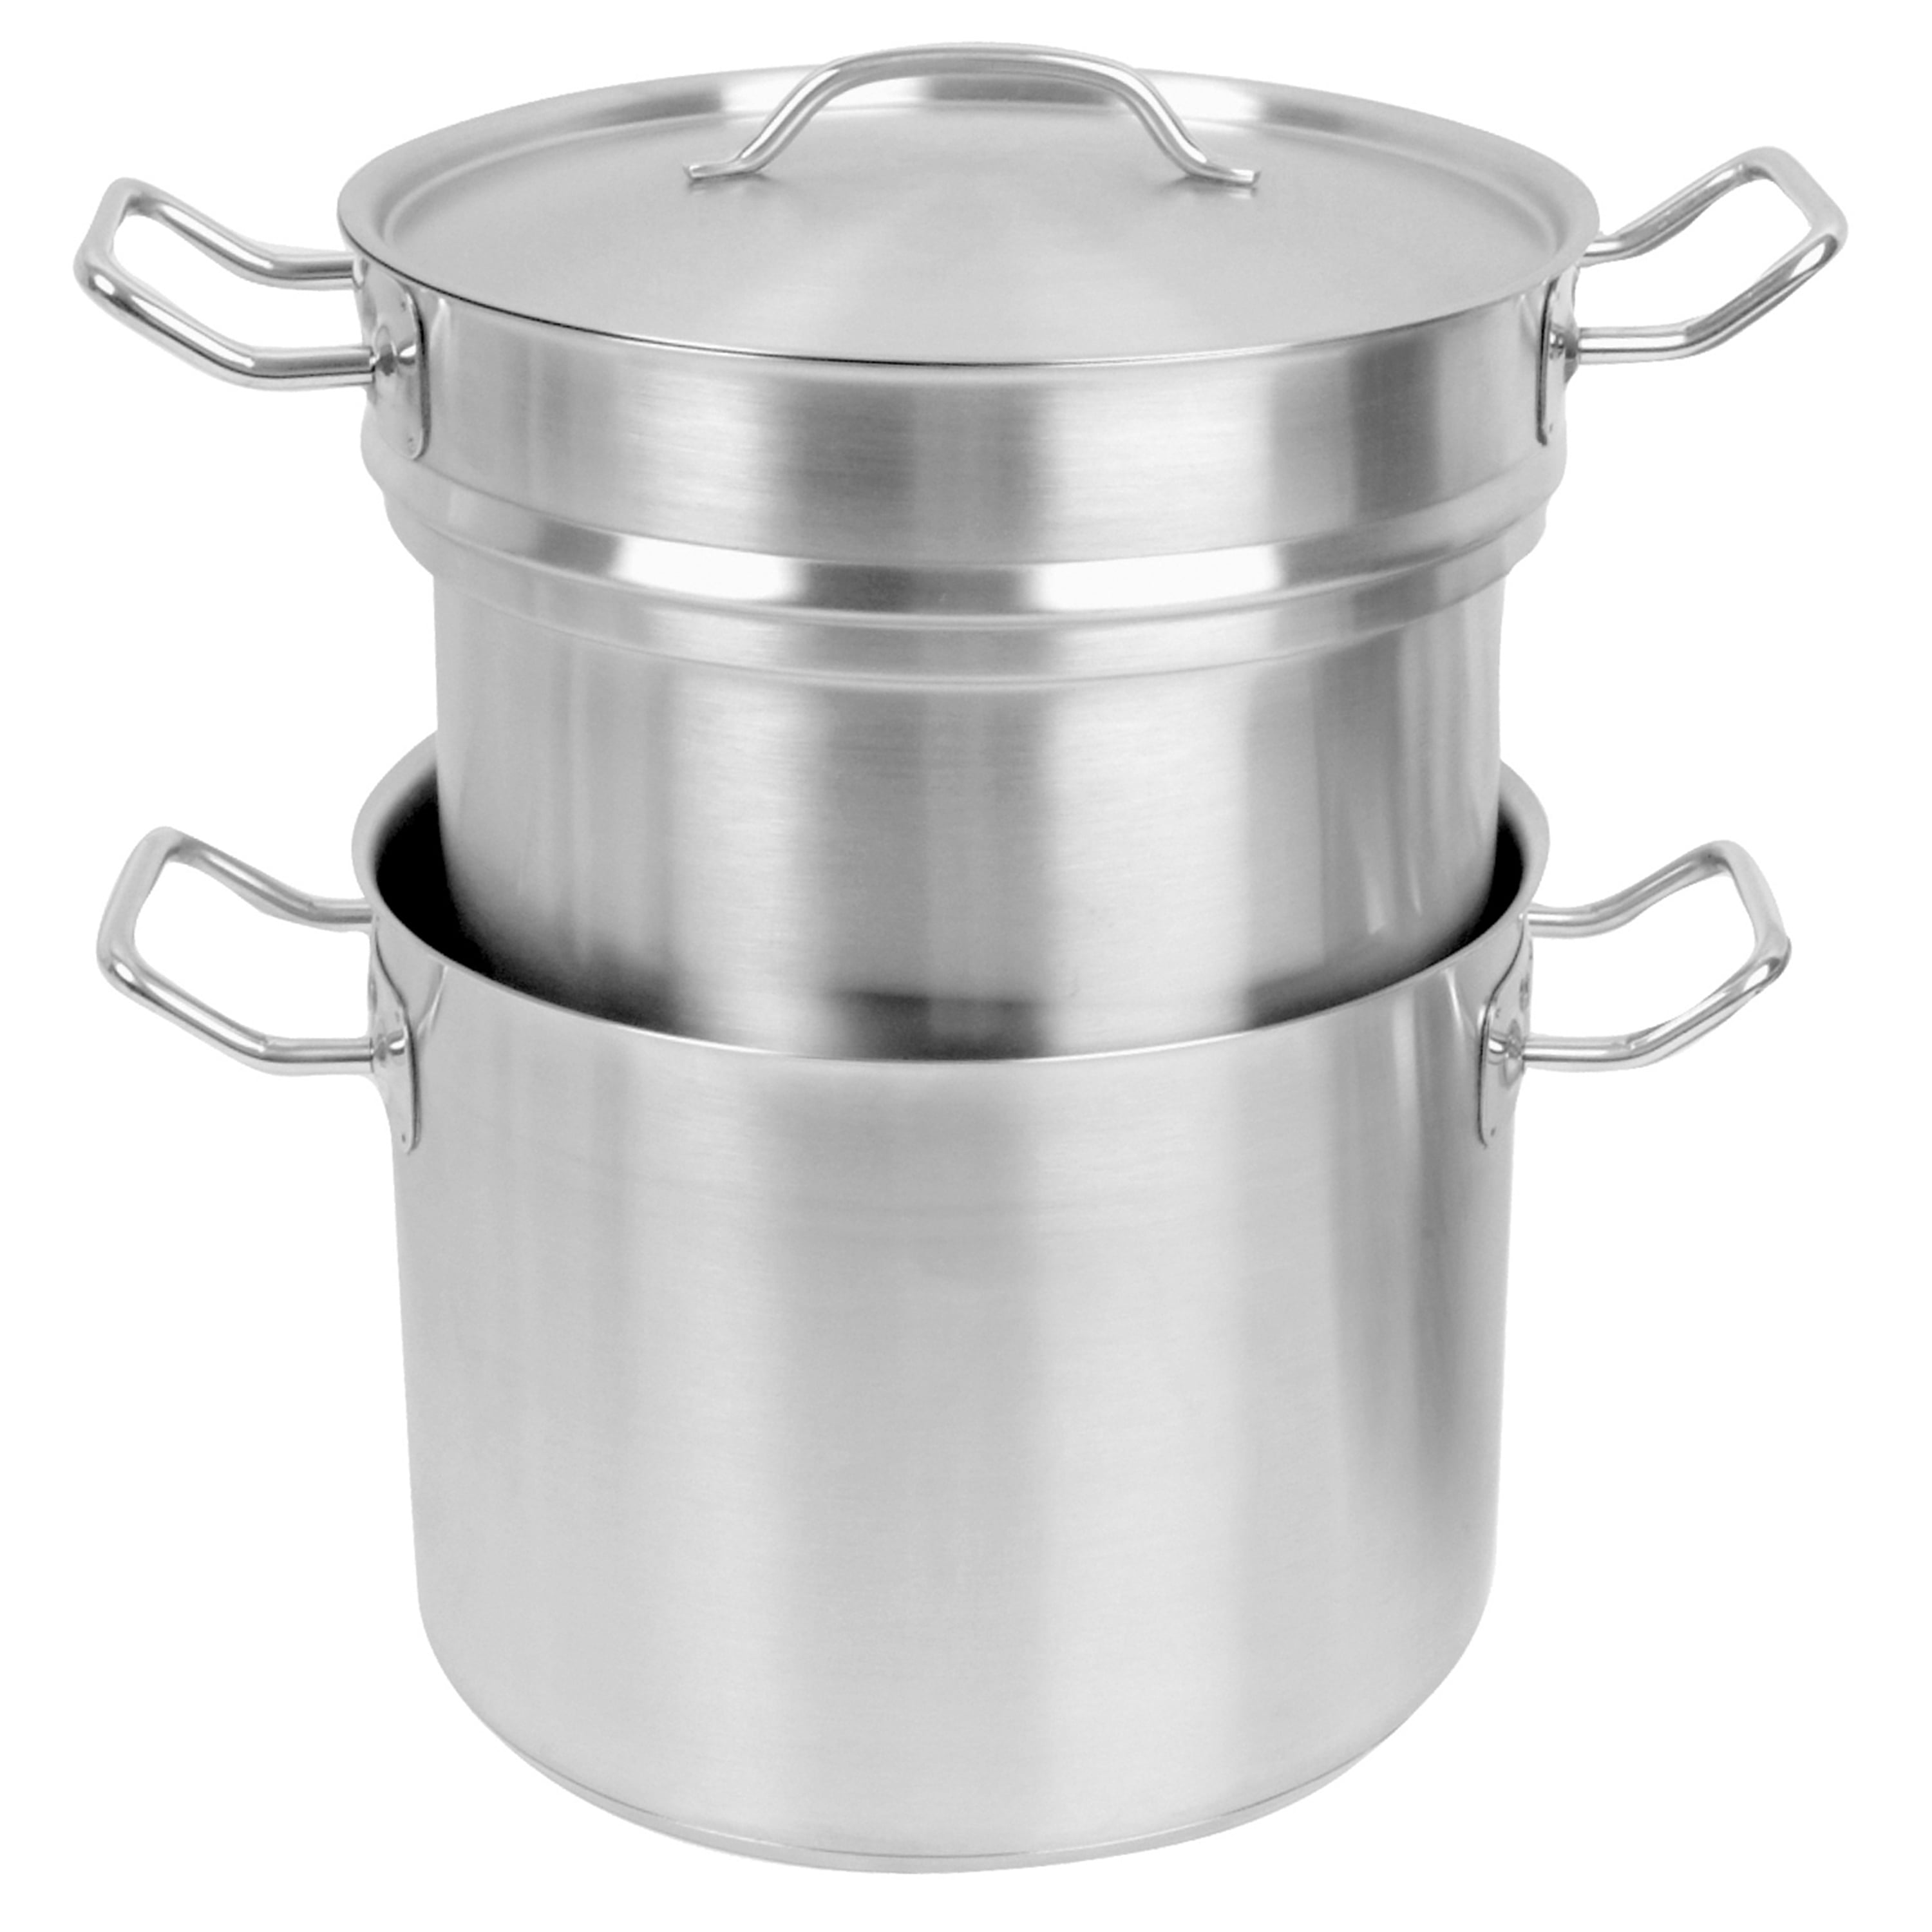 Farberware Stainless Double boiler Q15C w/tempered glass lid GUC